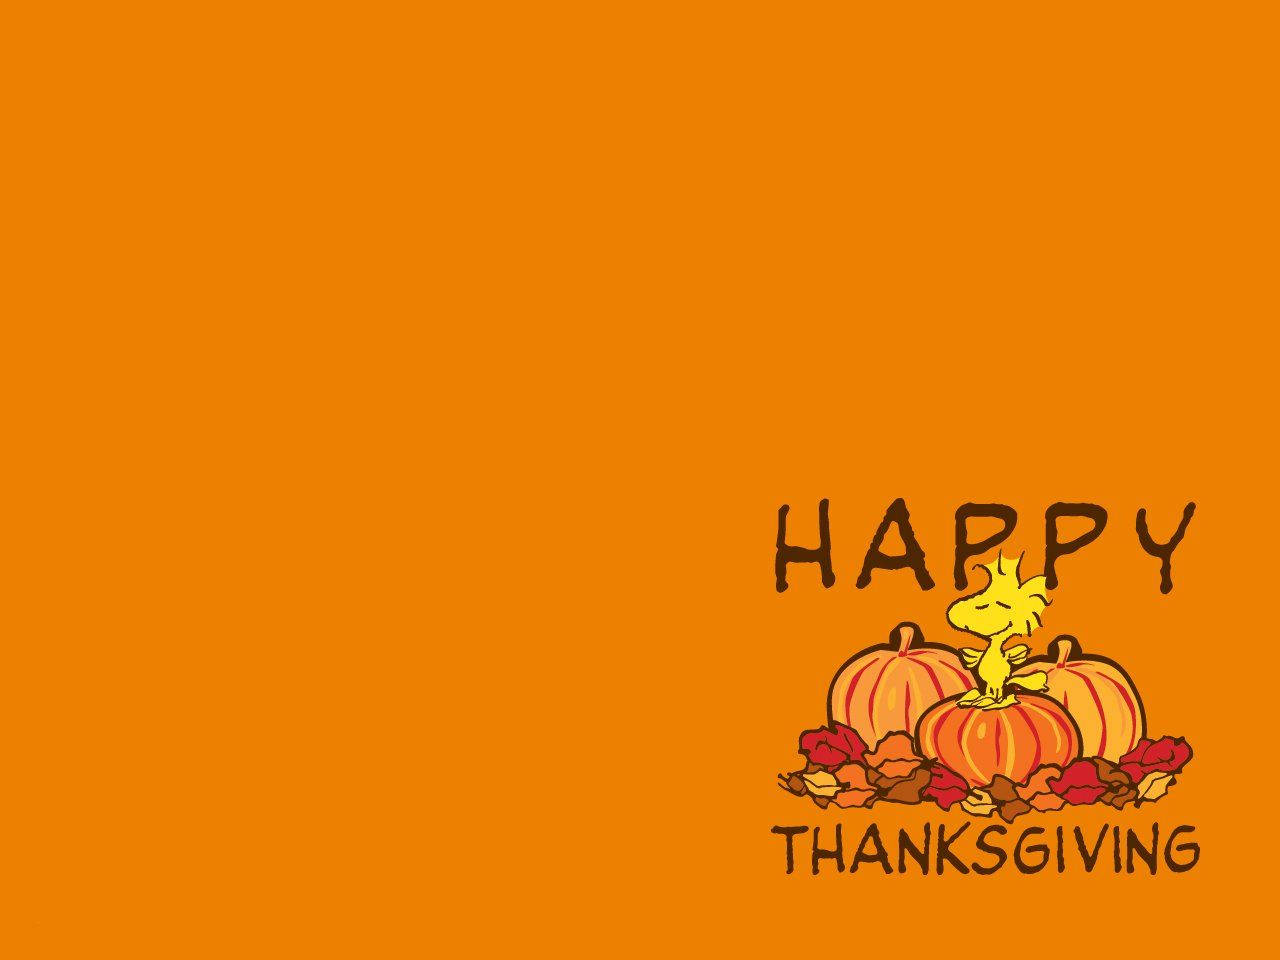 A Happy Thanksgiving Card With A Cartoon Snoopy Wallpaper